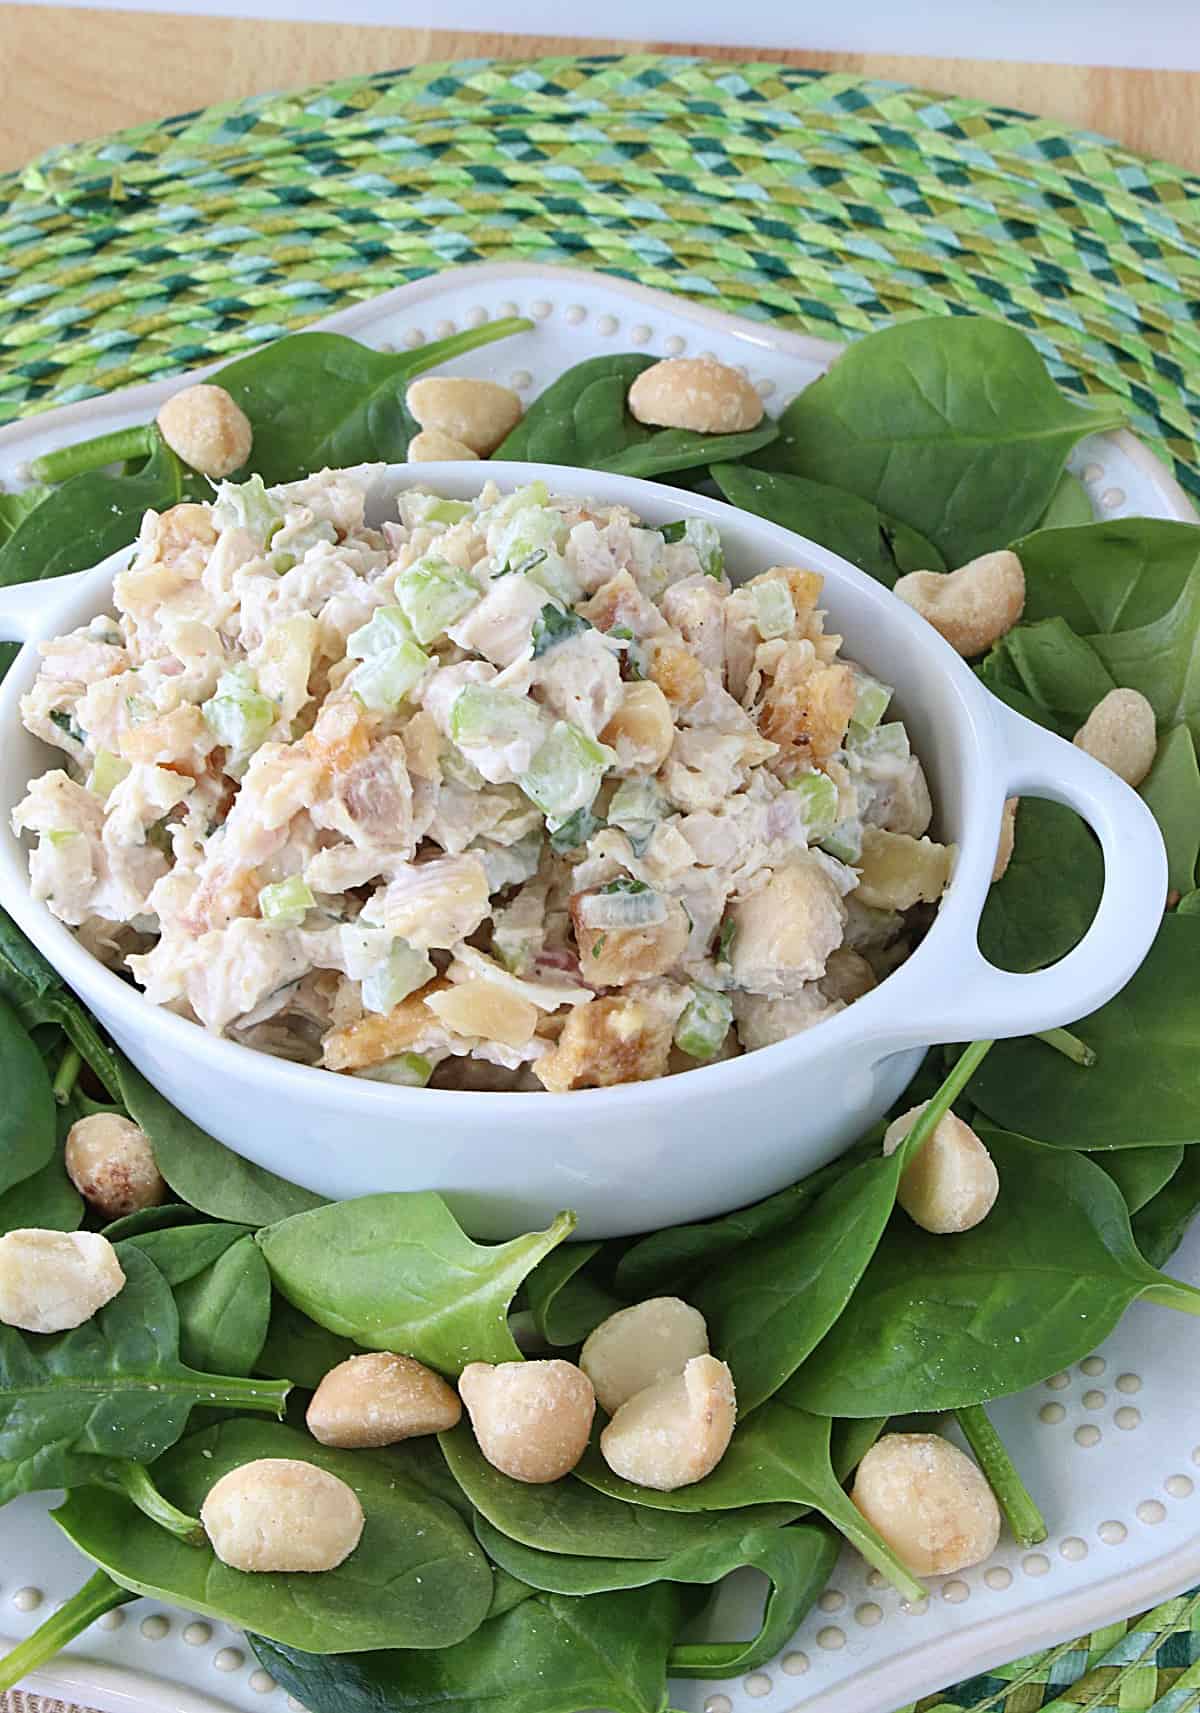 Delicious Hawaiian Chicken Salad in a small white casserole dish on a bed of spinach leaves.